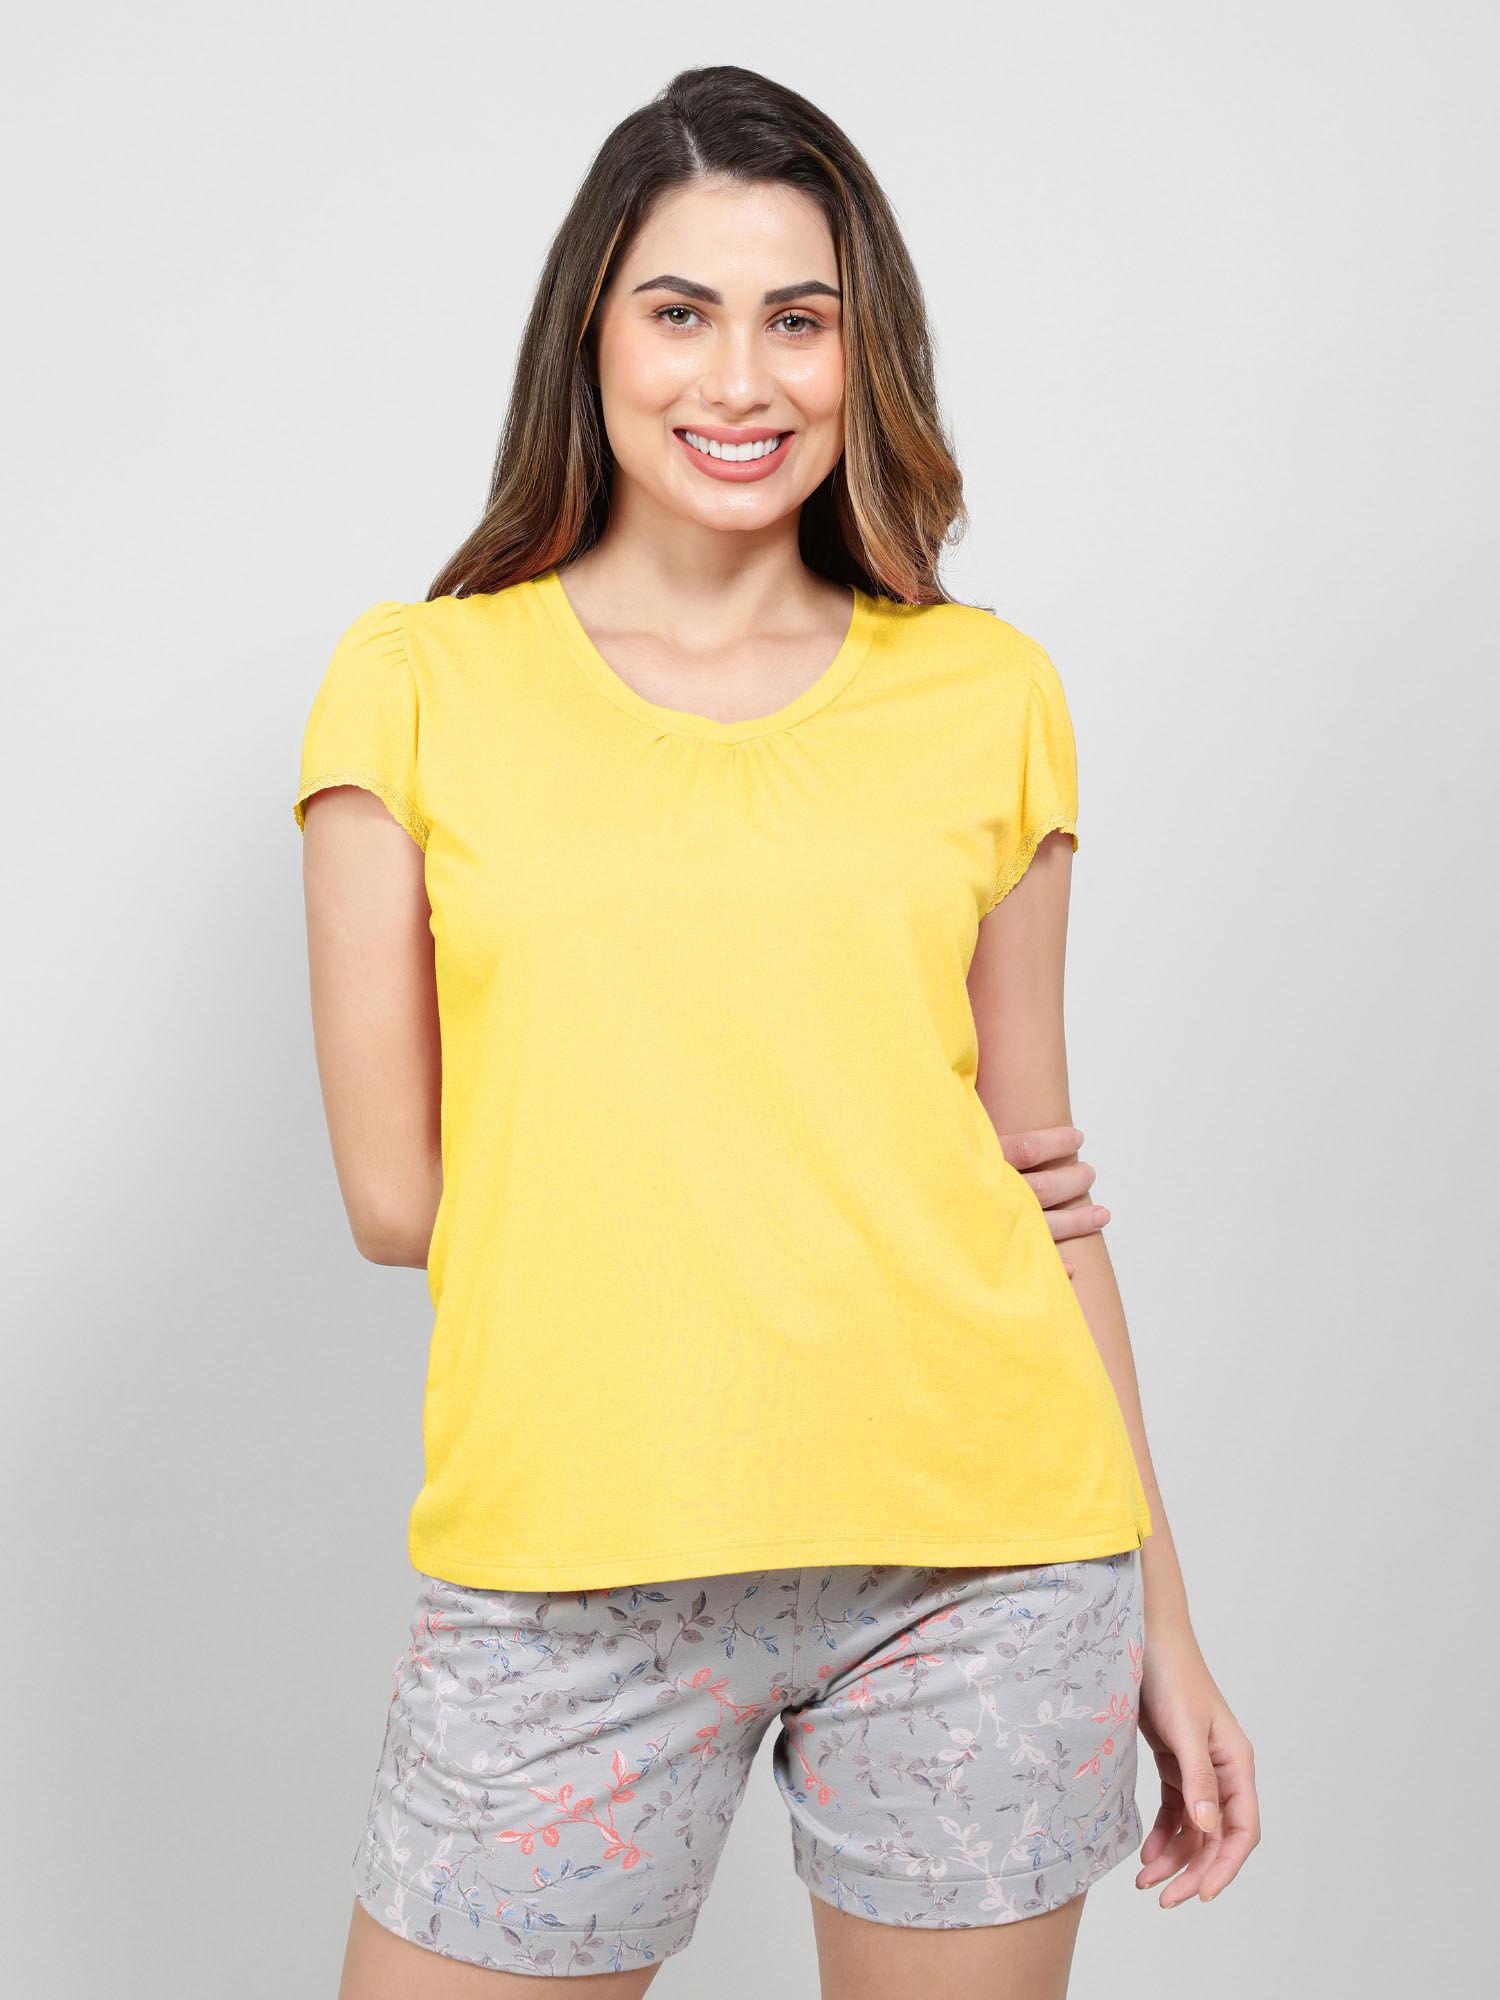 rx12 womens micro modal cotton relaxed fit solid round neck t-shirt - yolk yellow